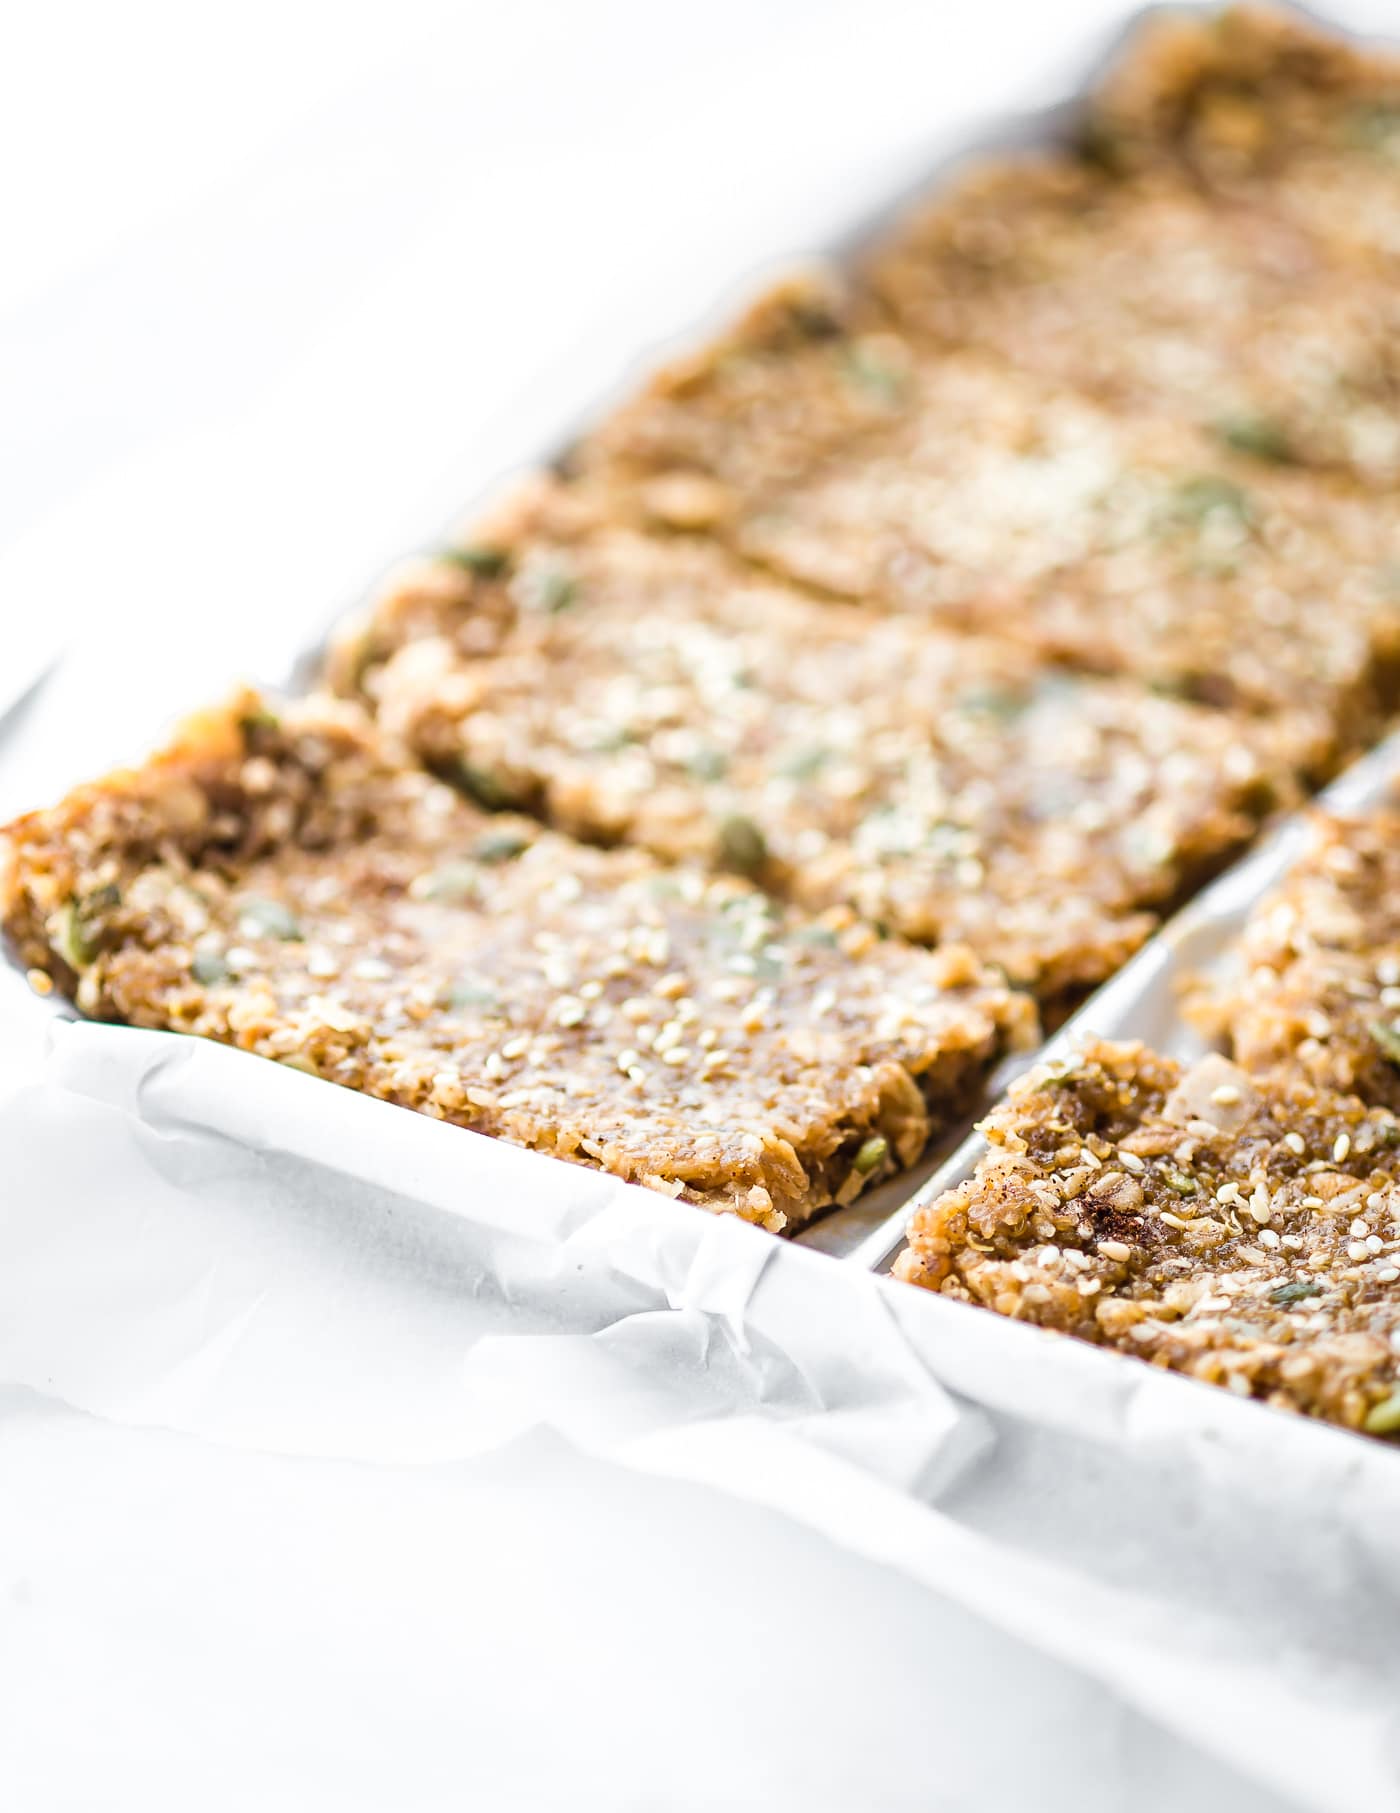 Maple Sesame Quinoa Bars are a delicious vegan breakfast or energy bar. Maple syrup, sesame, sunflower seed butter, & quinoa make for a sweet nutty flavor.